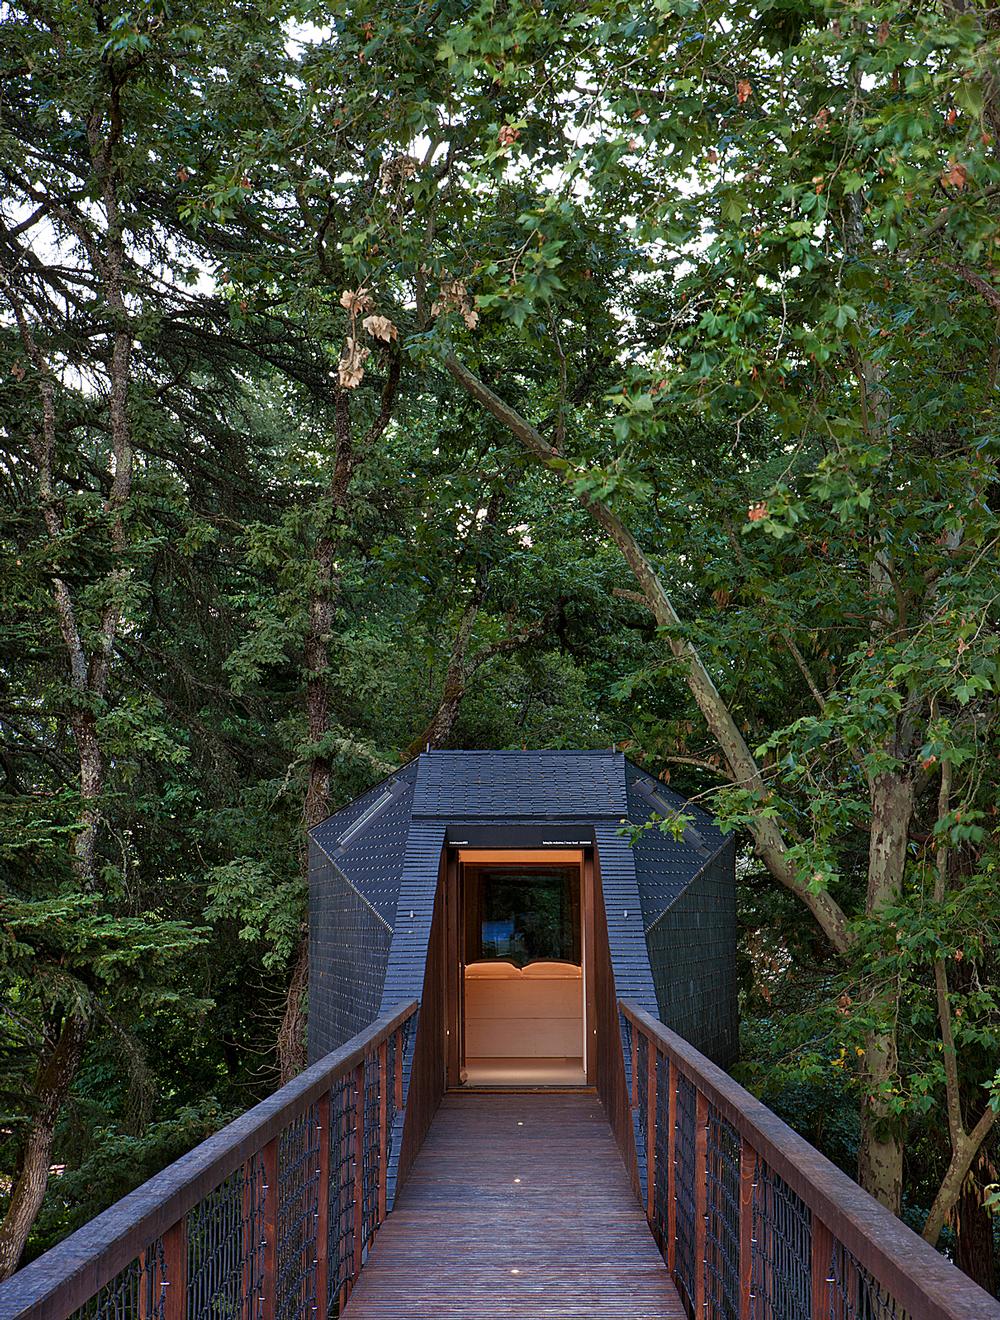 The two Tree Houses and 13 Eco Houses were designed by Portugese architect Luís Rebelo de Andrade 